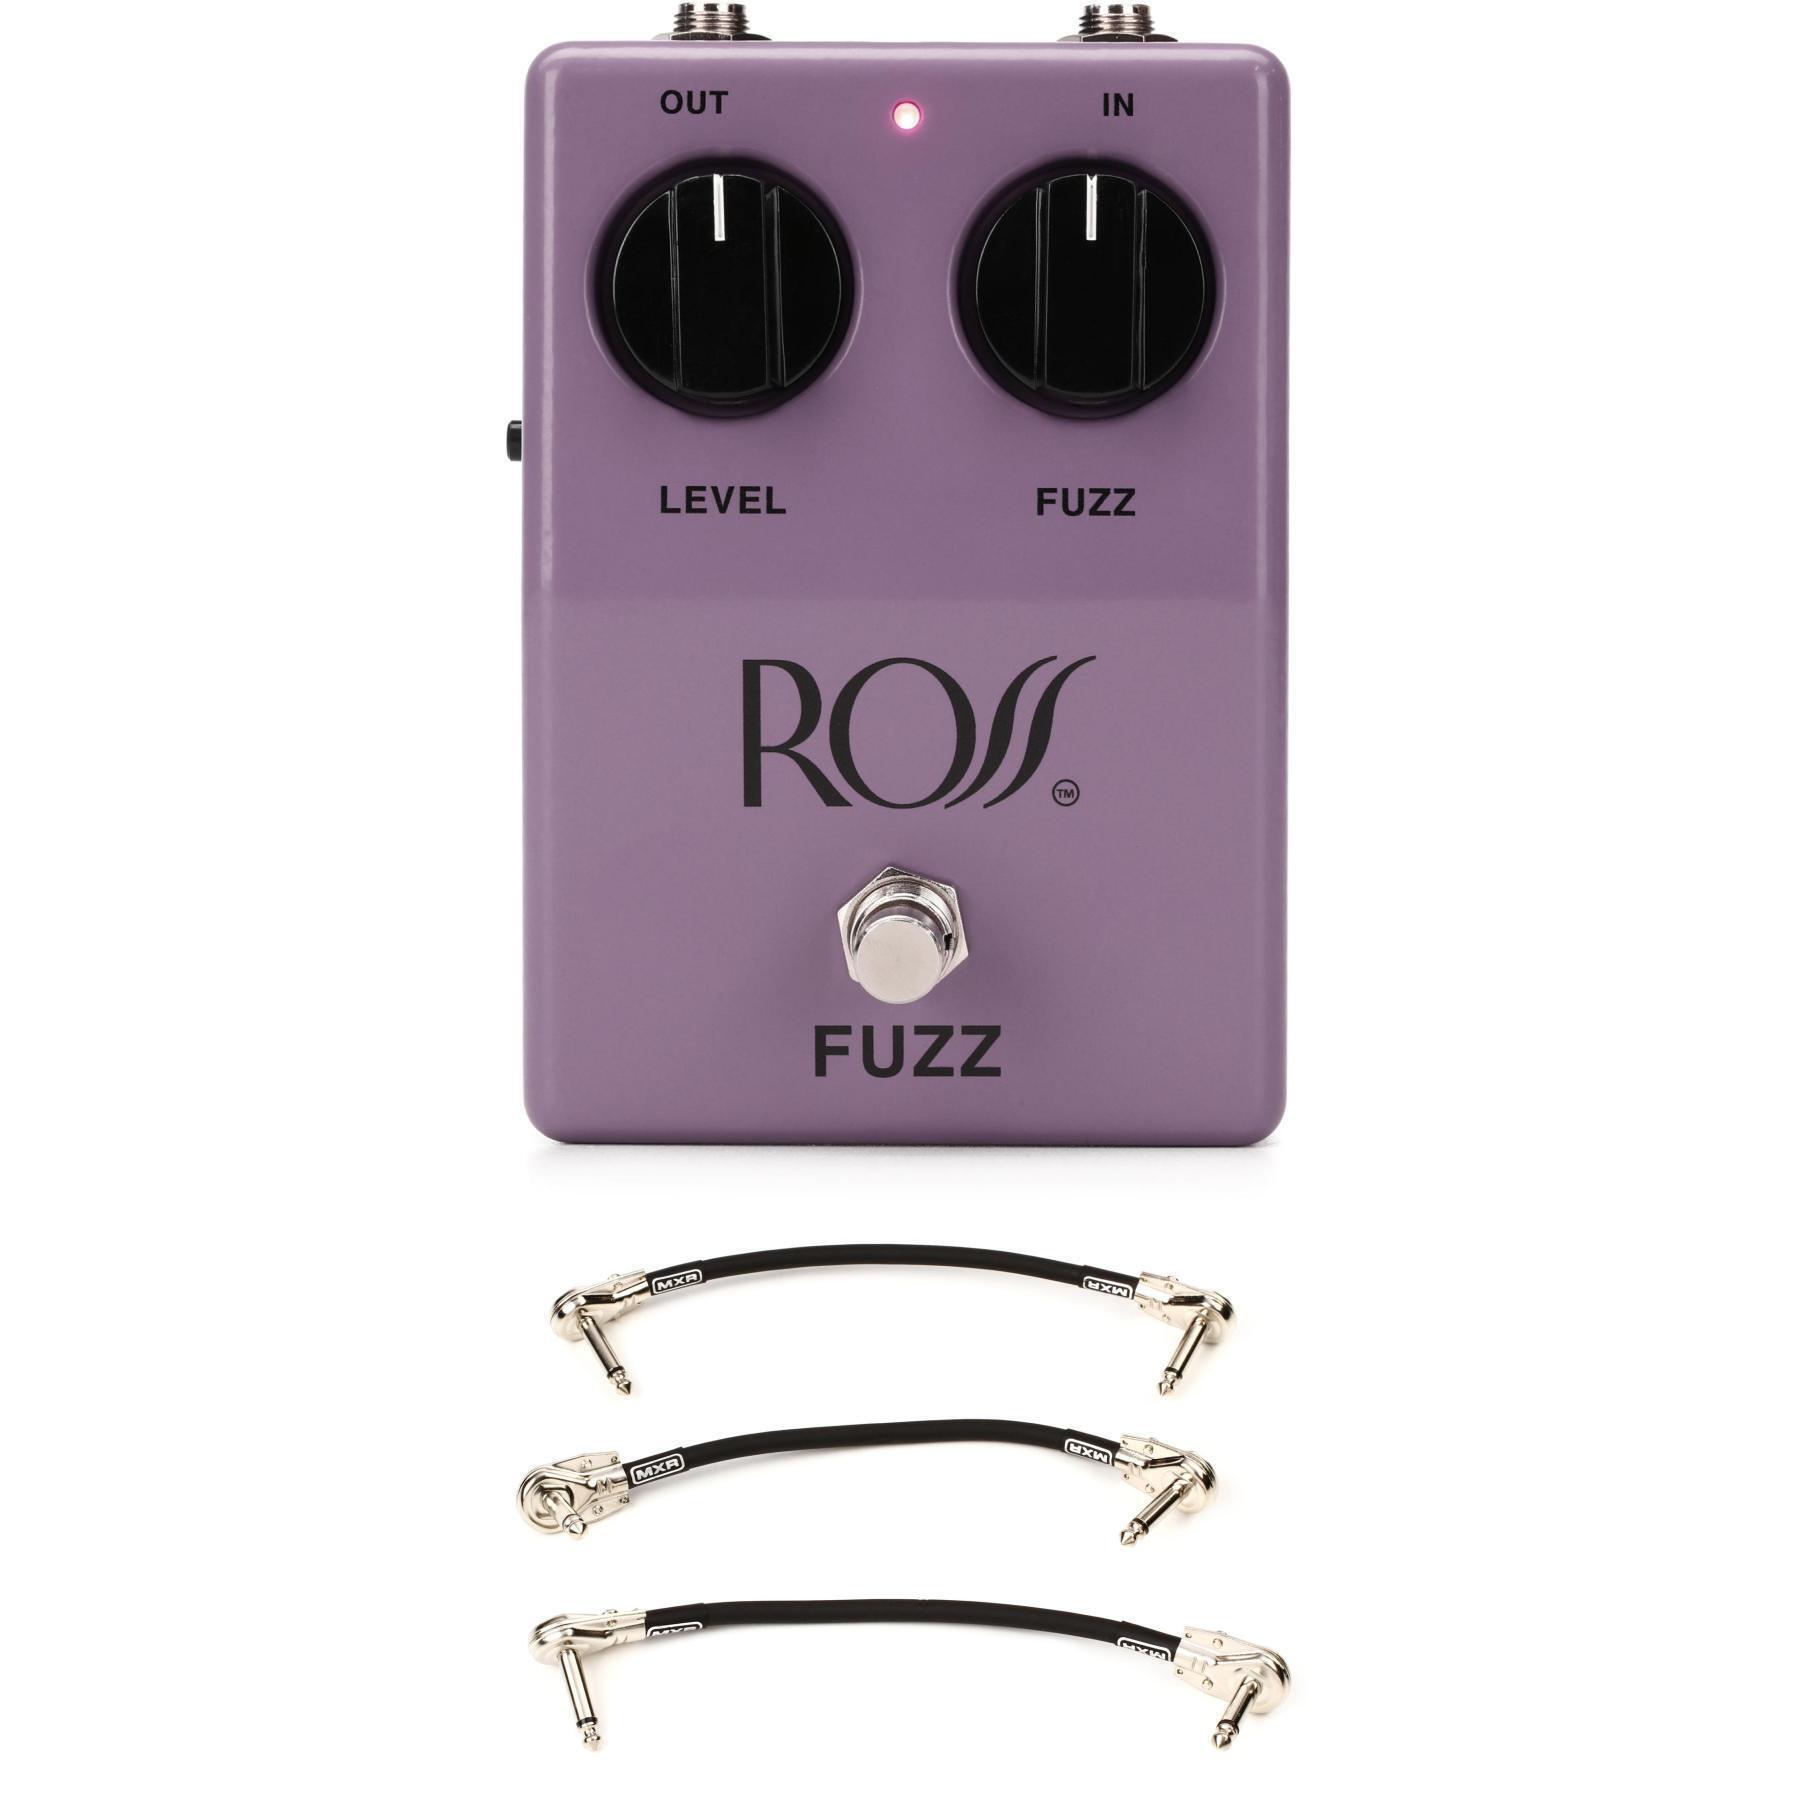 Ross Fuzz Guitar Effects Pedal | Sweetwater